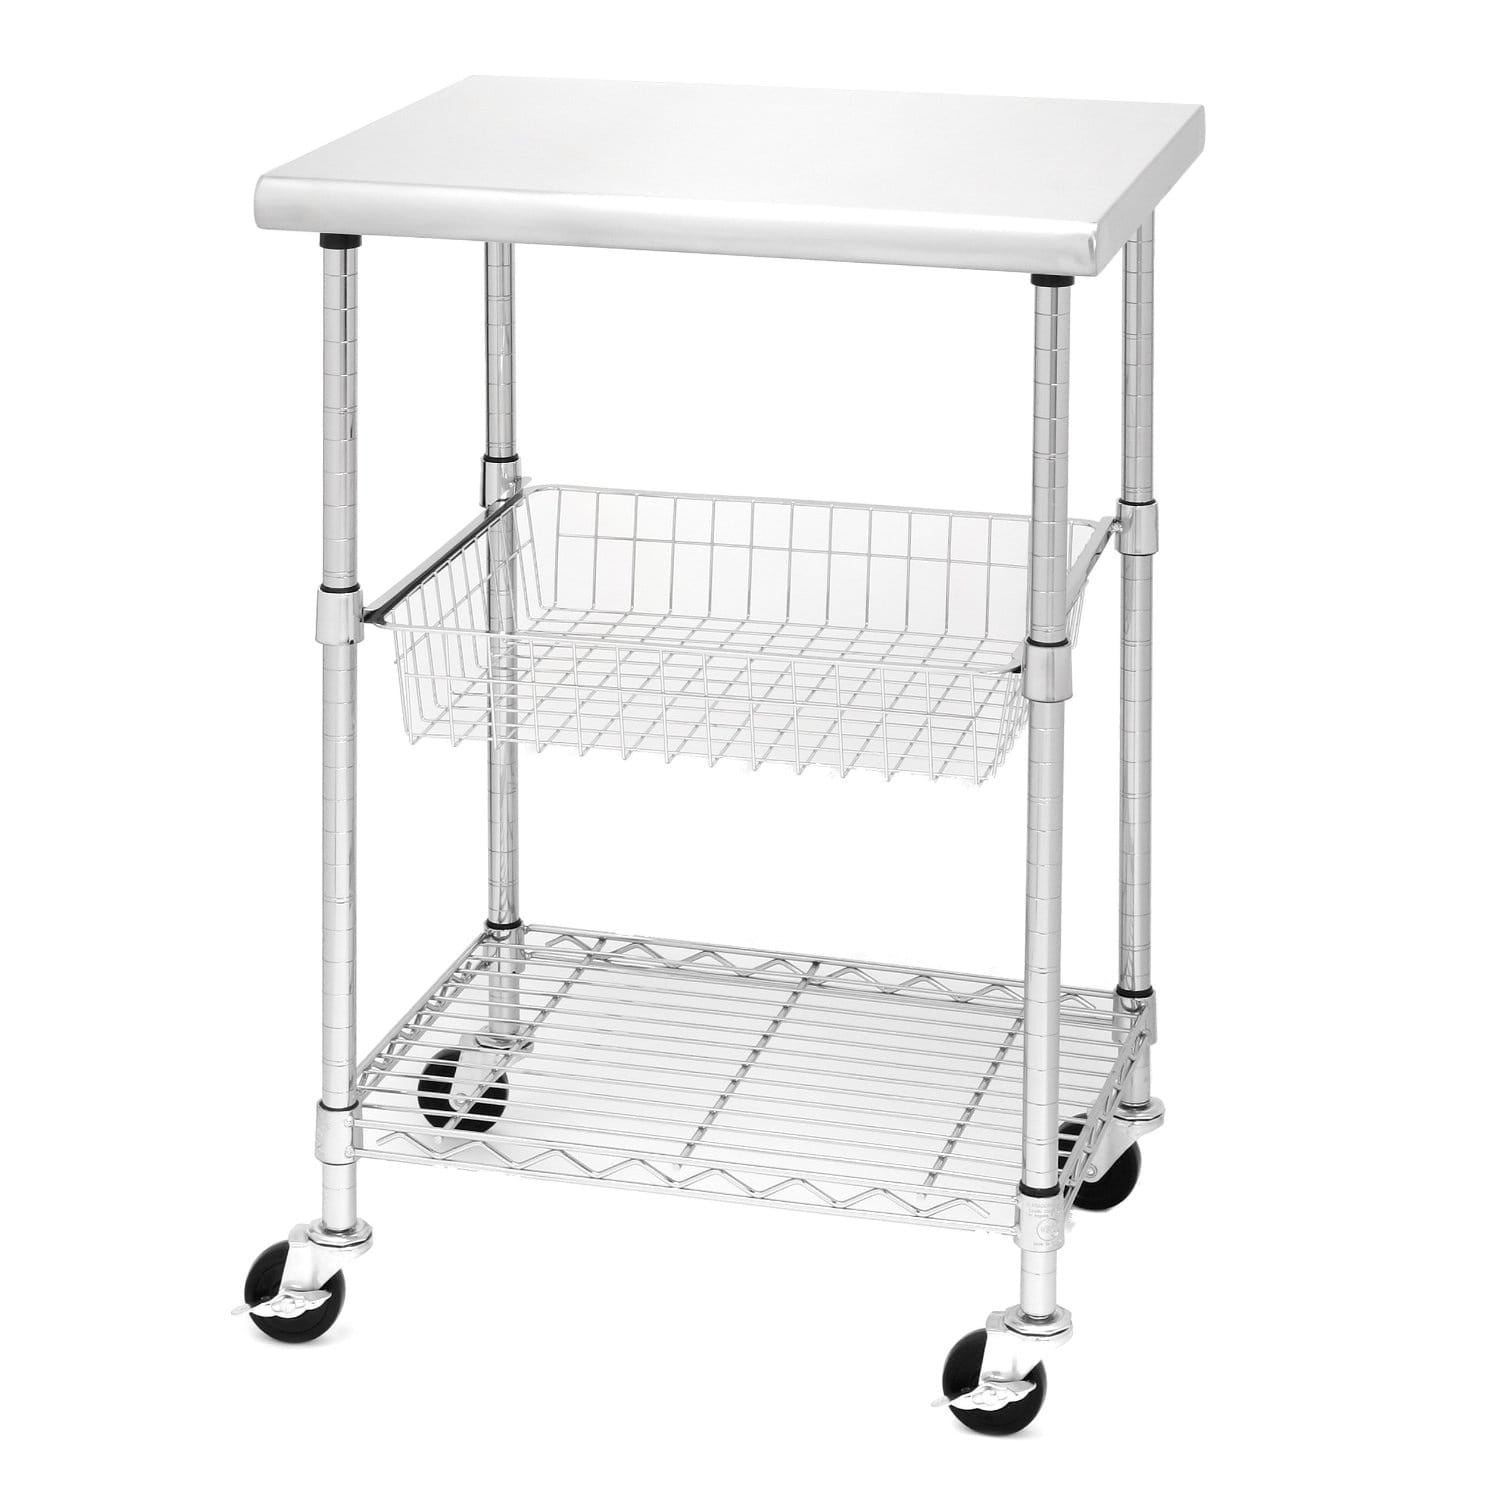 Seville Classics Stainless Steel Top Kitchen Cart – BrickSeek Seville Classics Stainless Steel Kitchen Cart